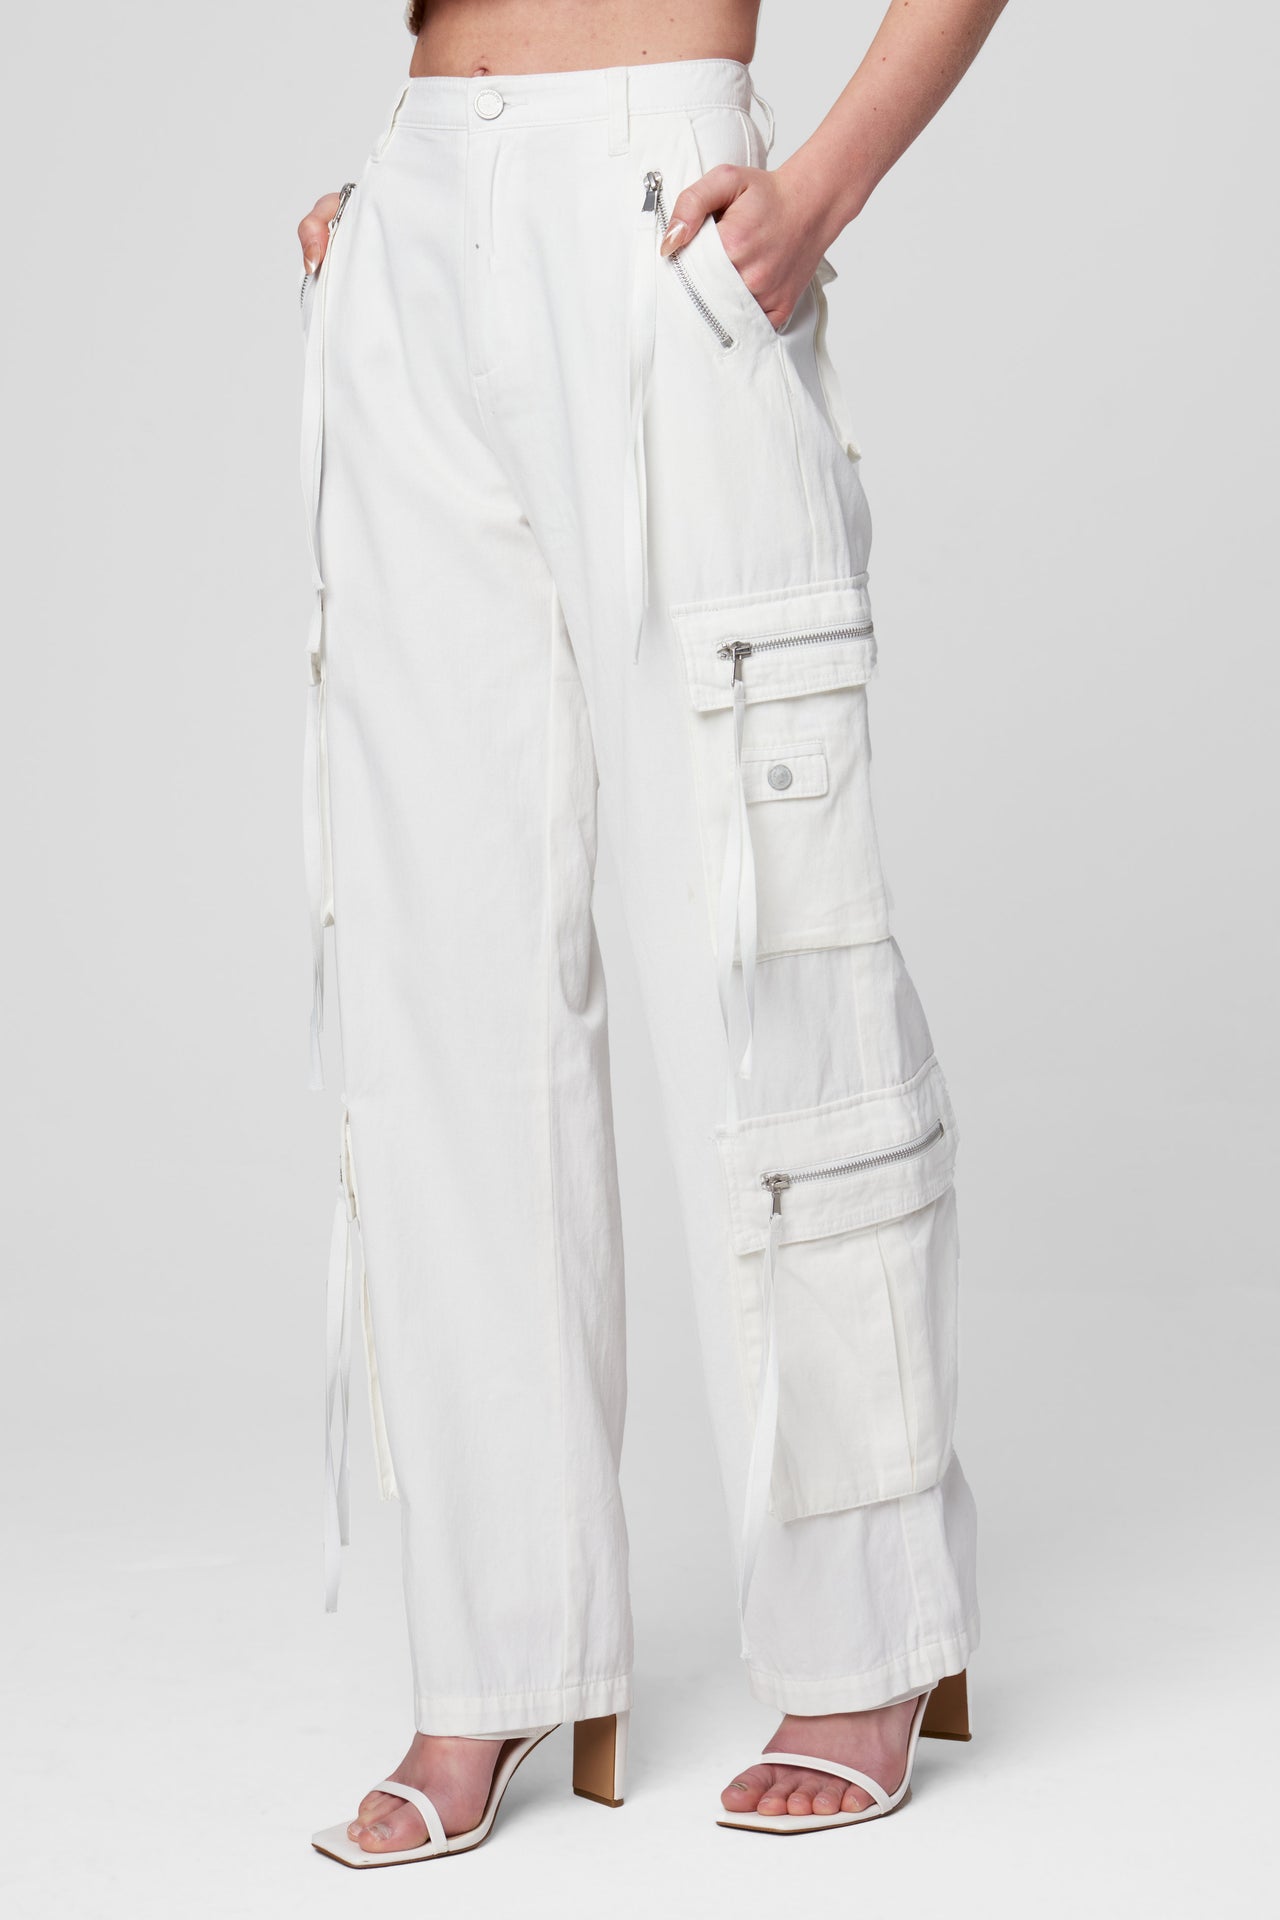 Creamy Scoop Cargo, Pant Bottom by Blank NYC | LIT Boutique